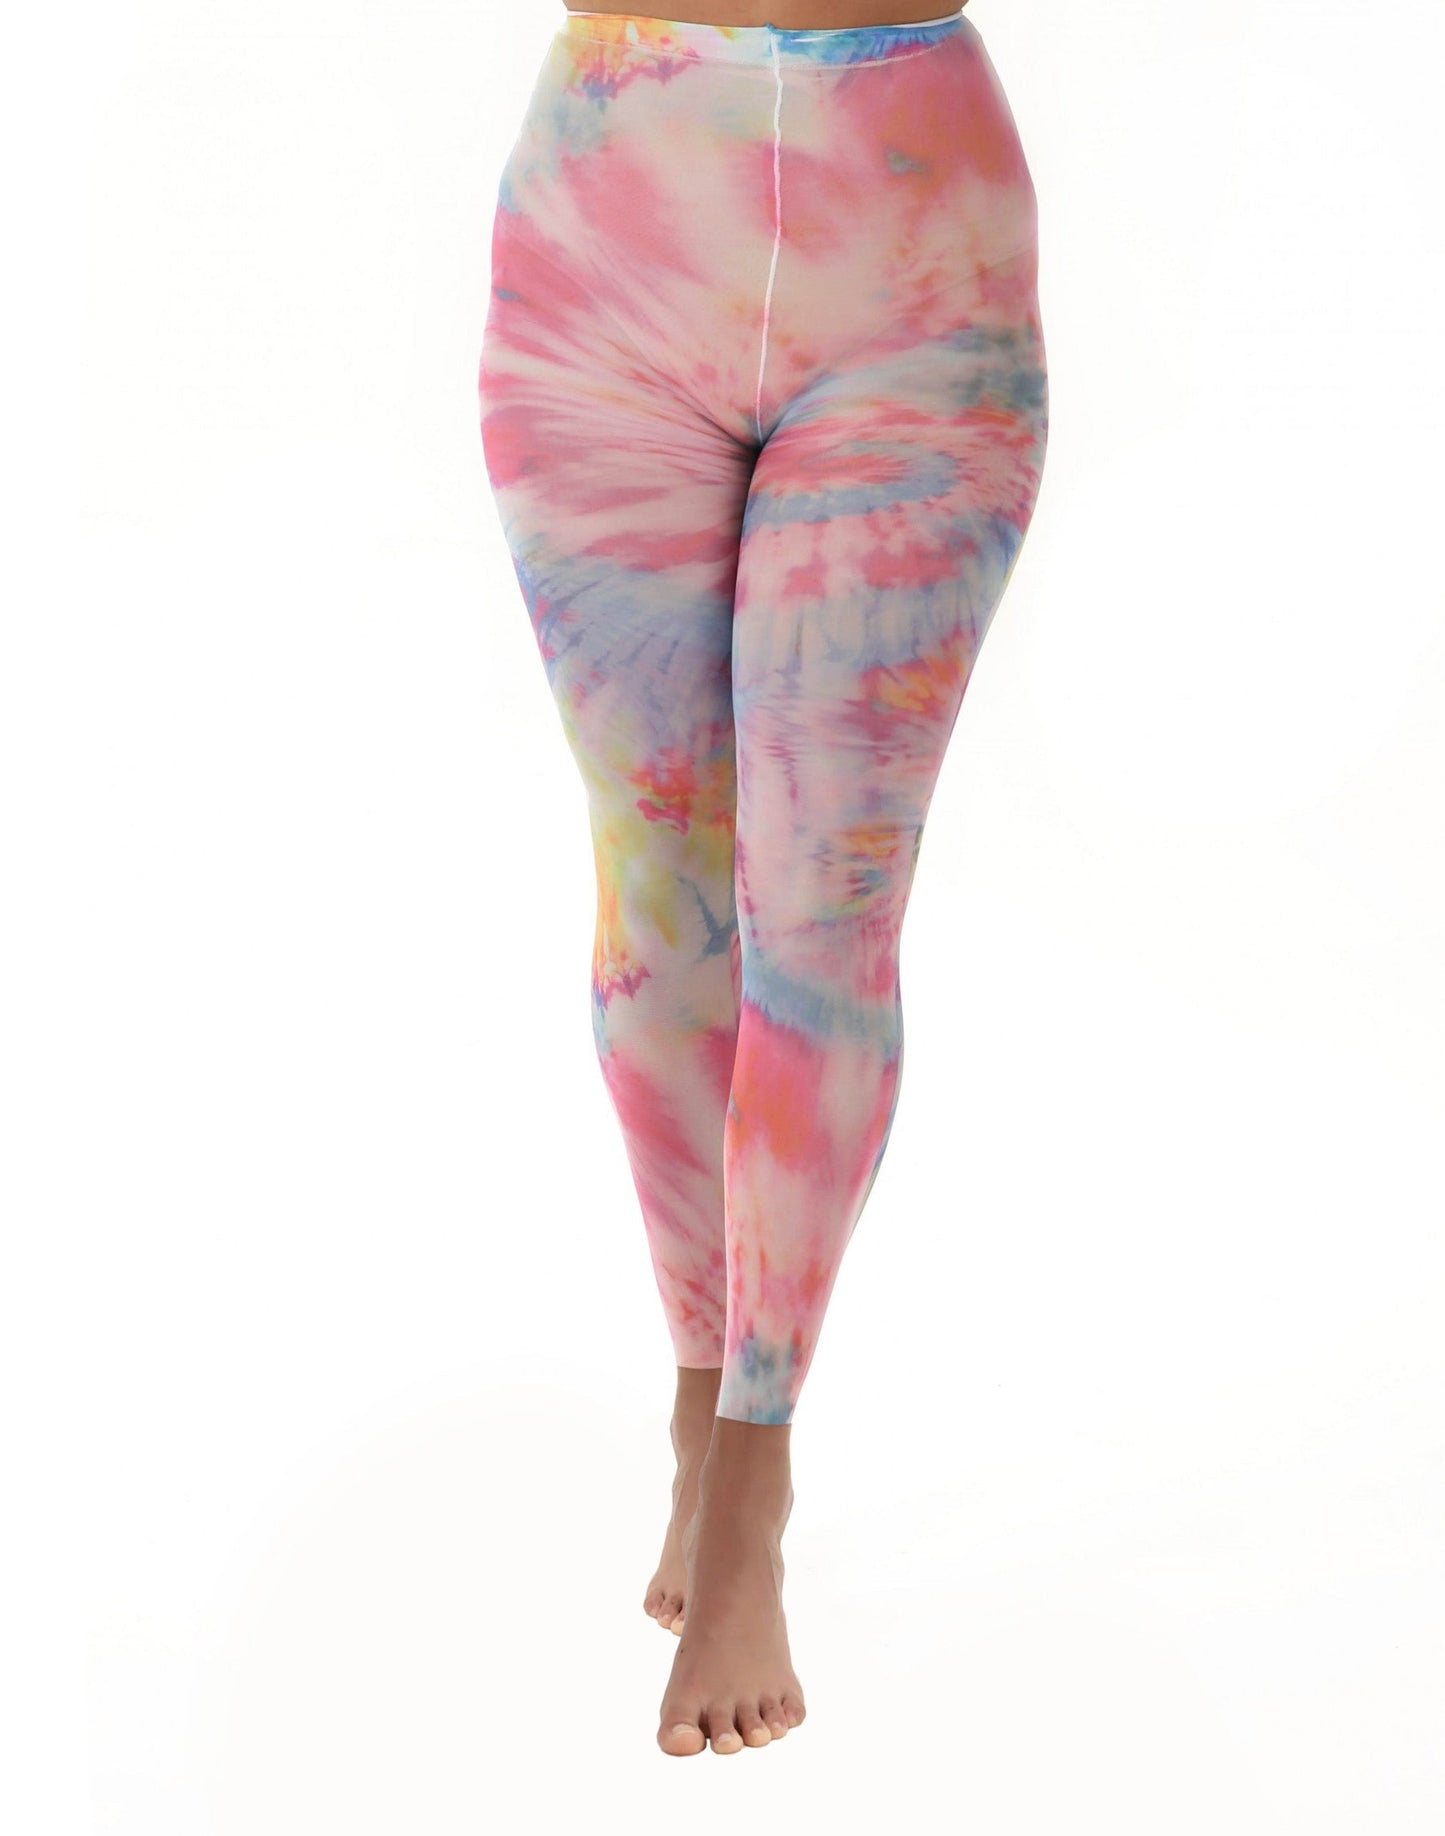 Pamela Mann Colour Burst Footless Tights - White opaque footless tights with an all over tie-dye style multicoloured print pattern.